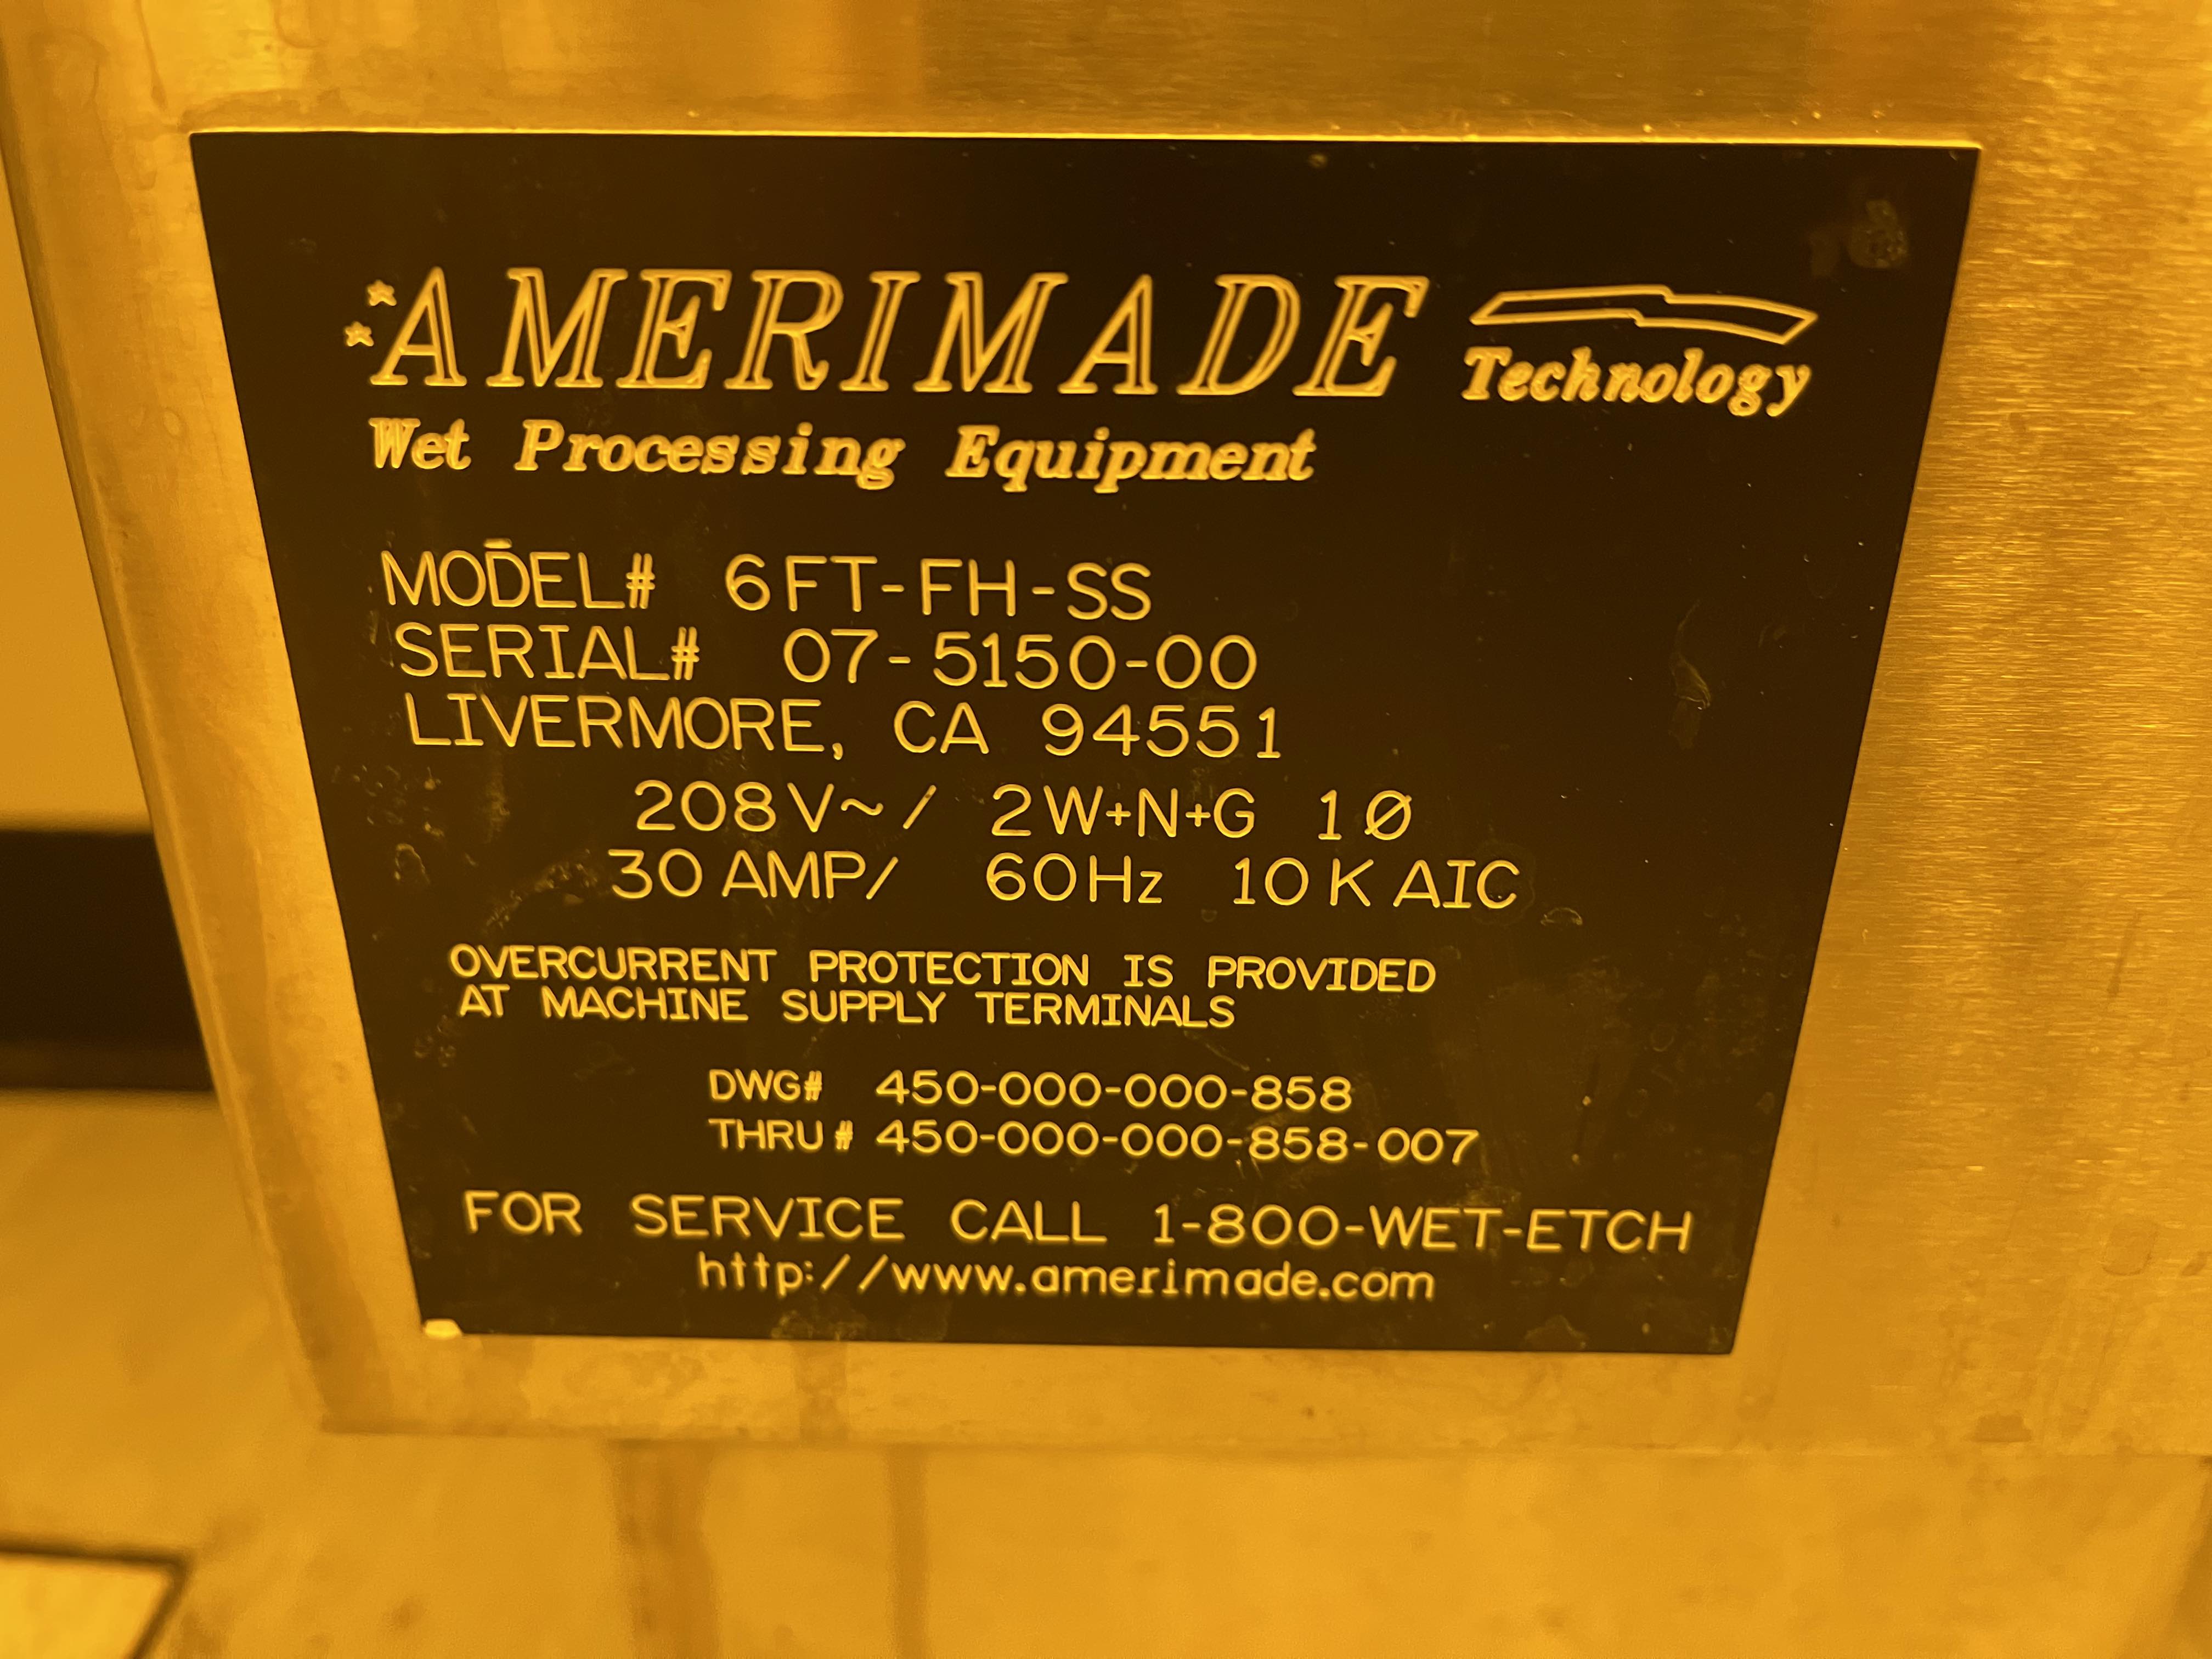 AMERIMADE 6ft-fh-ss